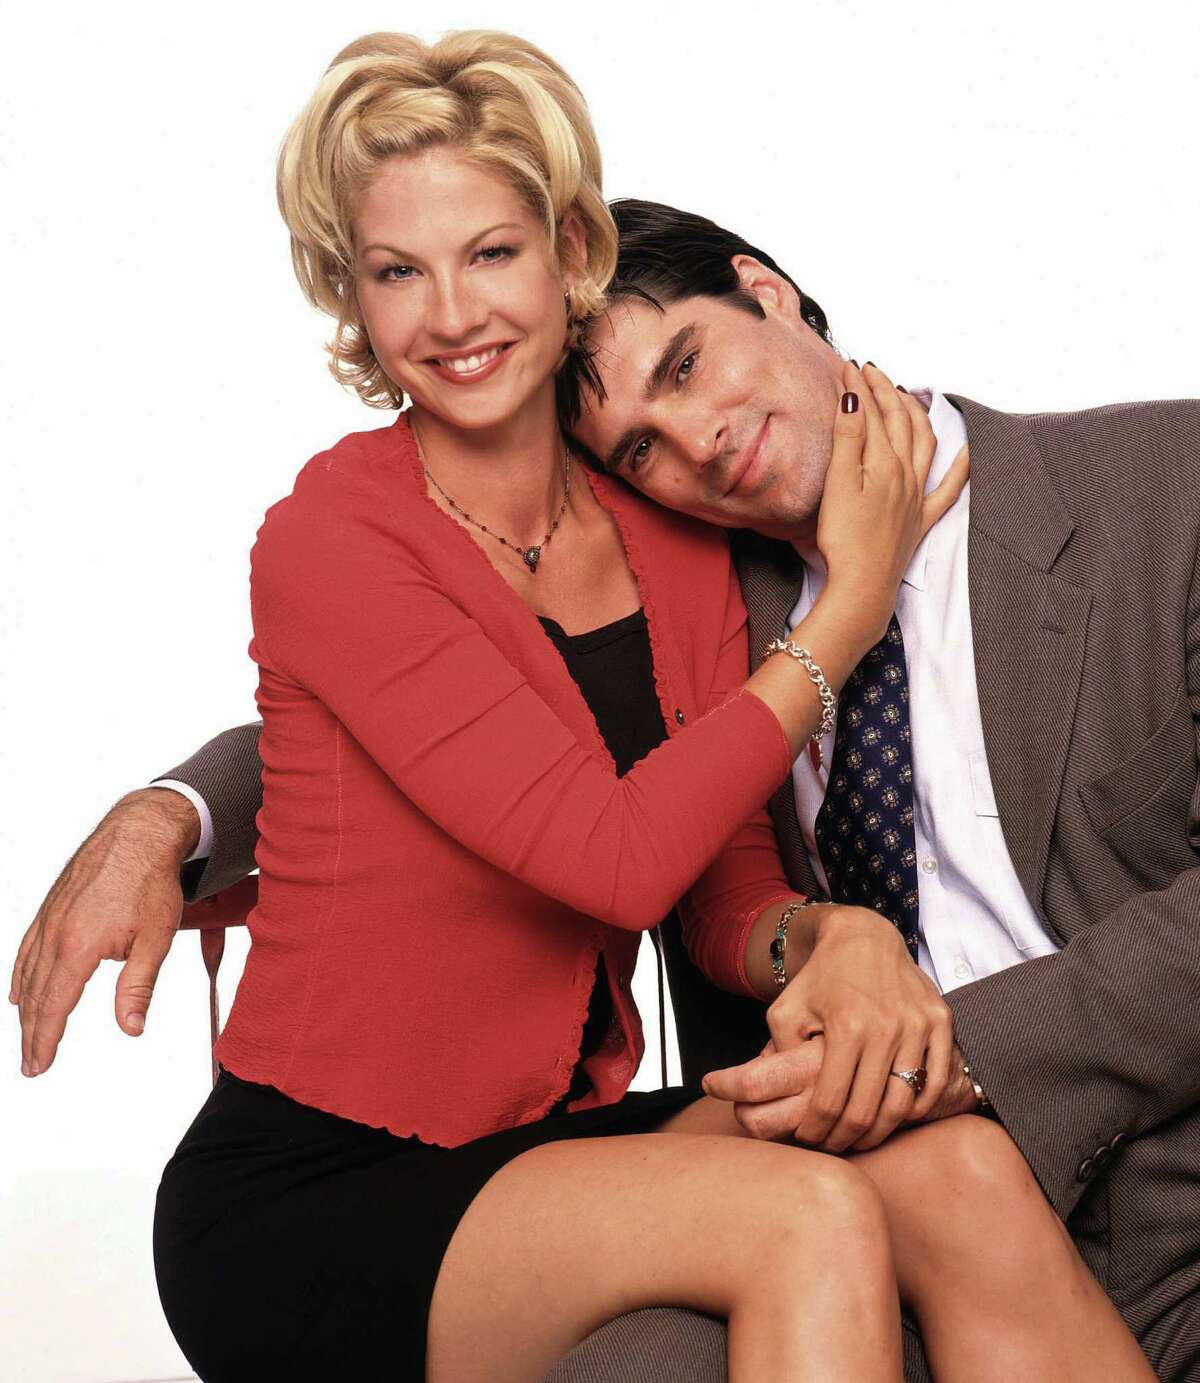 DHARMA & GREG-- Jenna Elfman and Thomas Gibson star in a new, life-affirming, romantic comedy, DHARMA & GREG, which will premiere WEDNESDAY, SEPT. 24 (8:30-9 pm, ET) on the ABC Television Network.